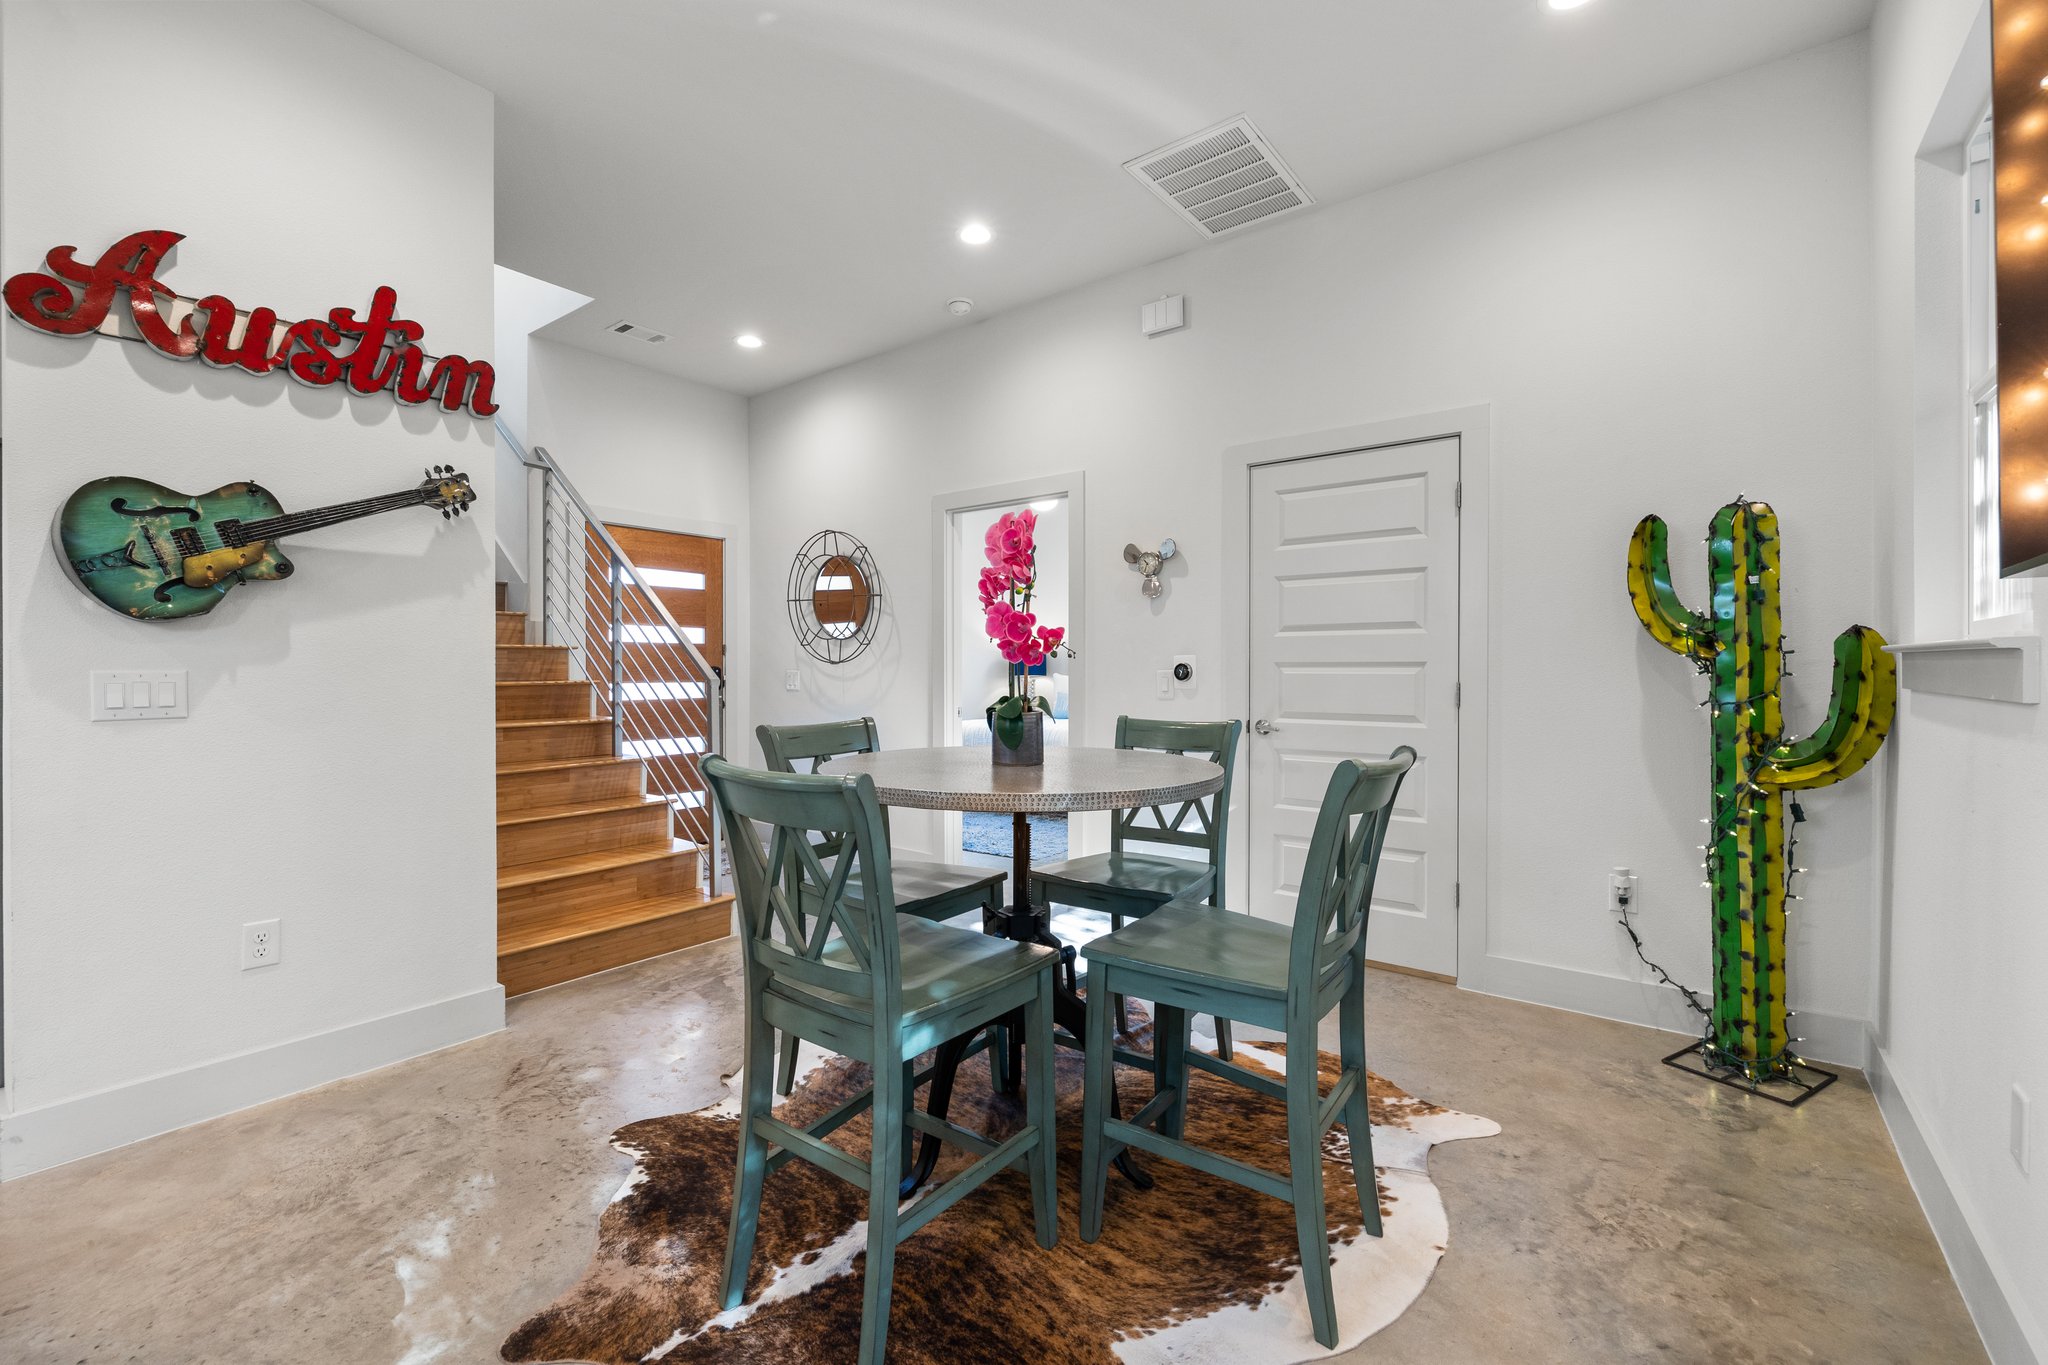 Dining room for four, cement floors, one bedroom on lower level. The "Austin" sign, guitar and cactus do not convey (are not included in the sale).